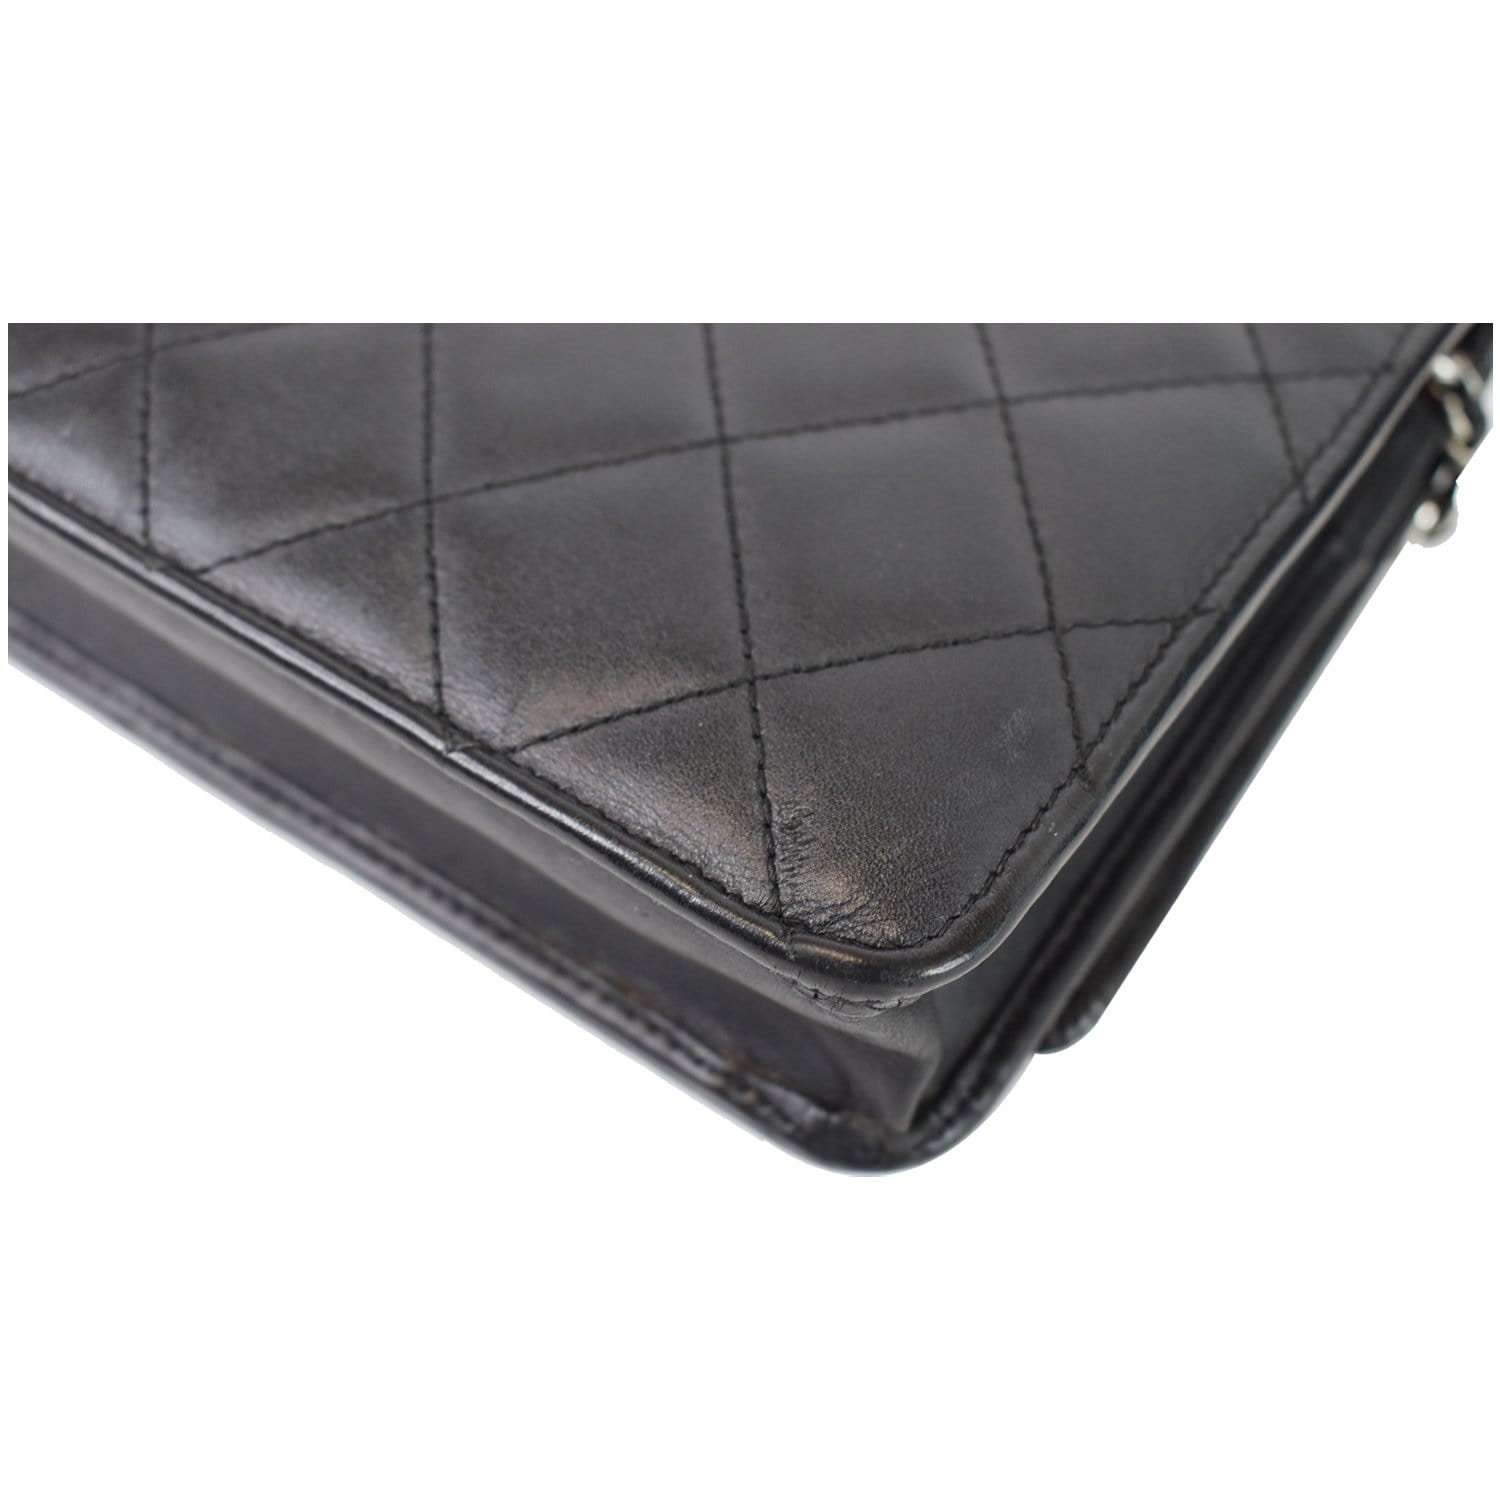 Chanel Black Quilted Caviar Jumbo CC Clutch Bag. Condition: 3. 12